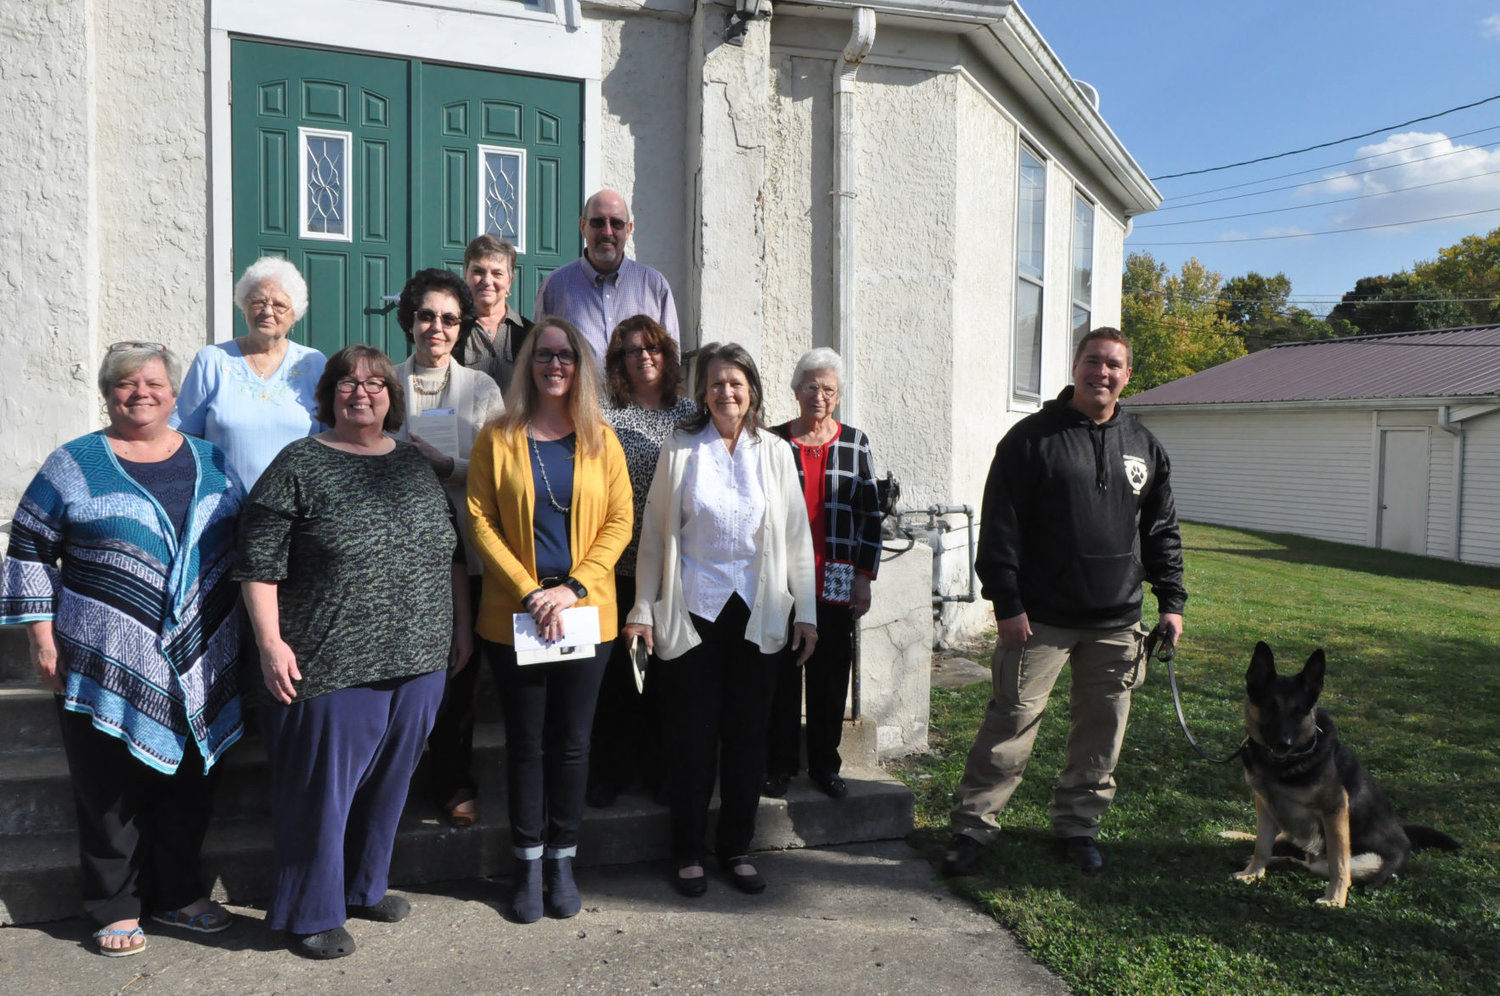 Recipients of funds from Milligan Memorial Presbyterian Church pose for a photo with church members Sunday after the final service. The church donated money to five groups.